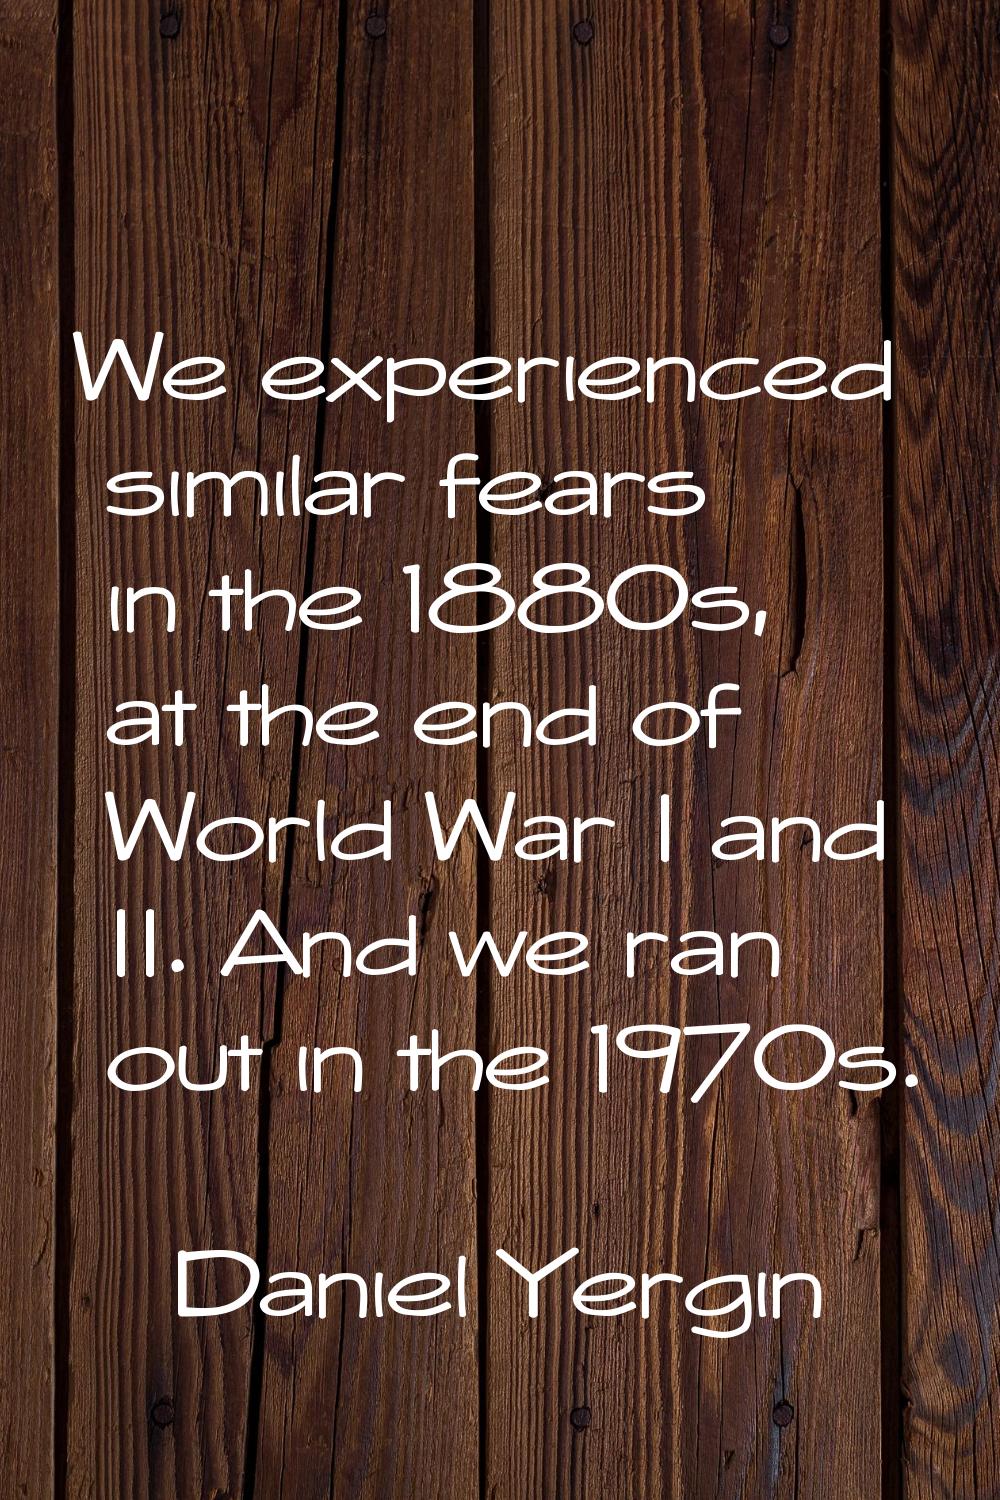 We experienced similar fears in the 1880s, at the end of World War I and II. And we ran out in the 